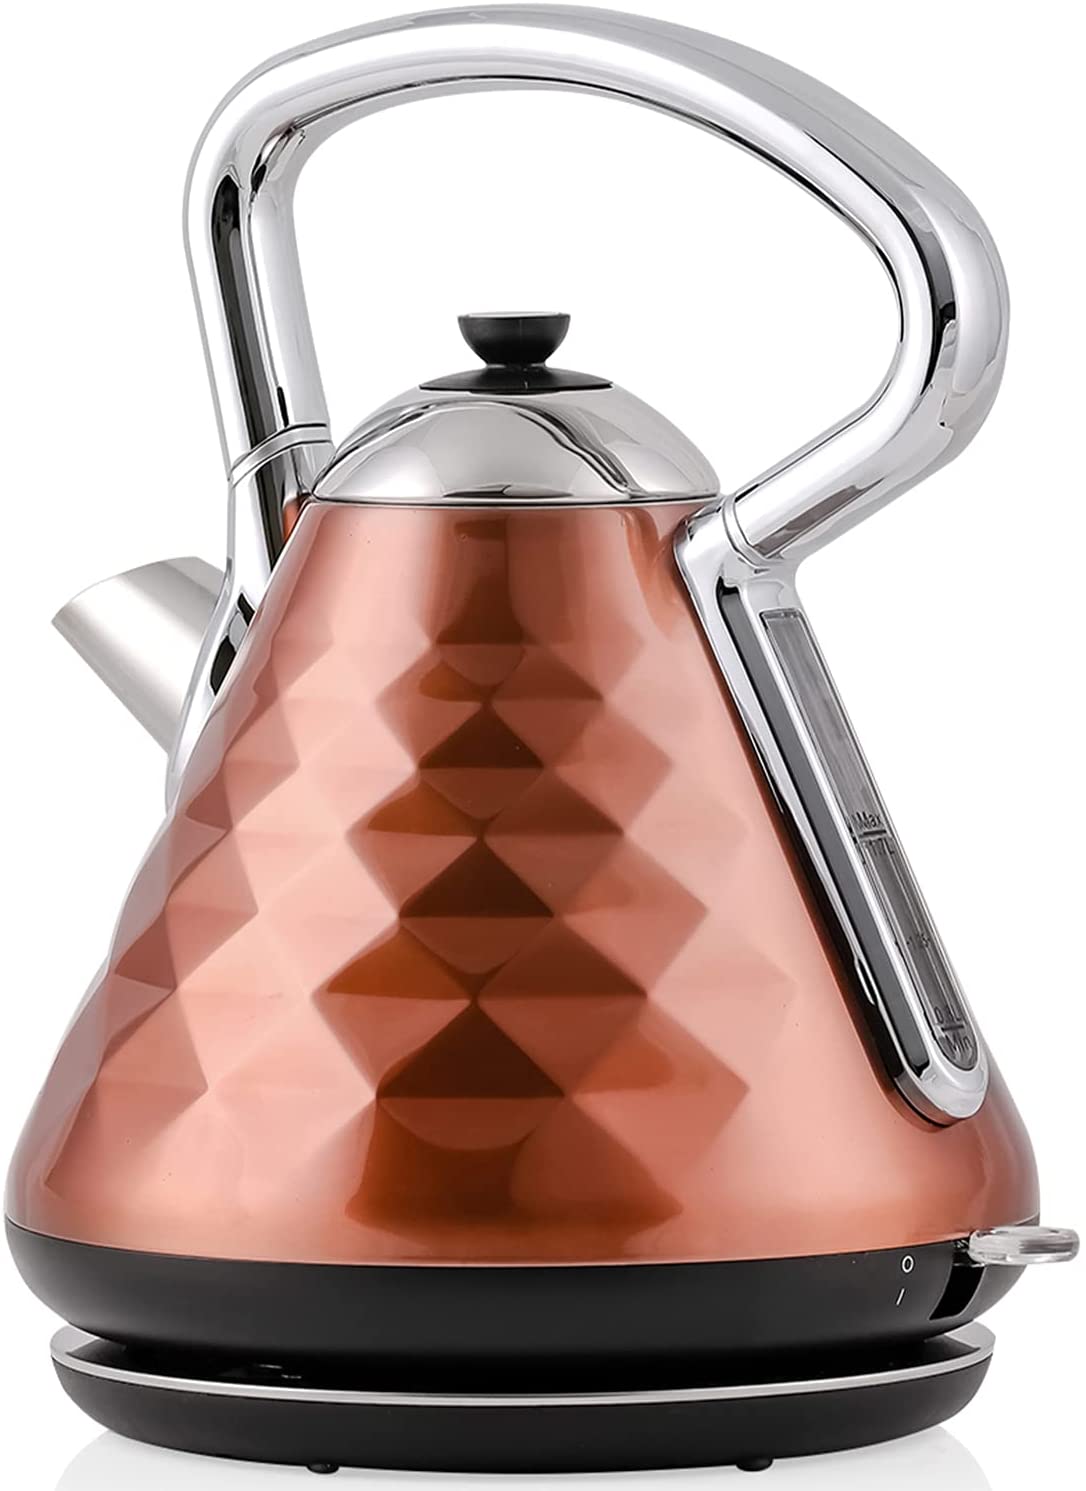 Ovente Electric Kettle in Copper